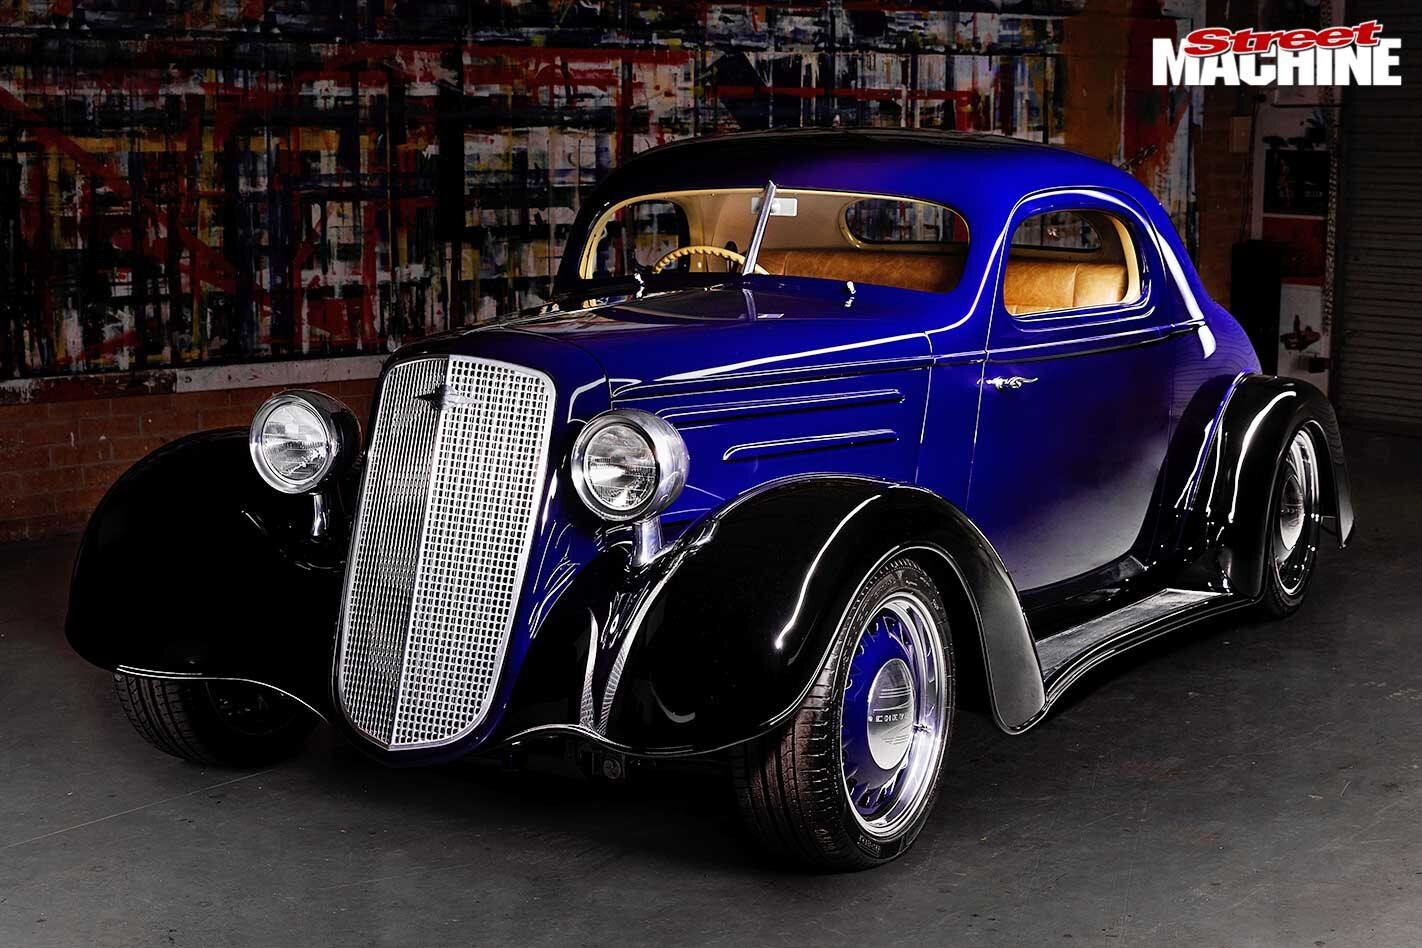 Peter Fitzpatrick-built LS2-powered 1935 Chev coupe